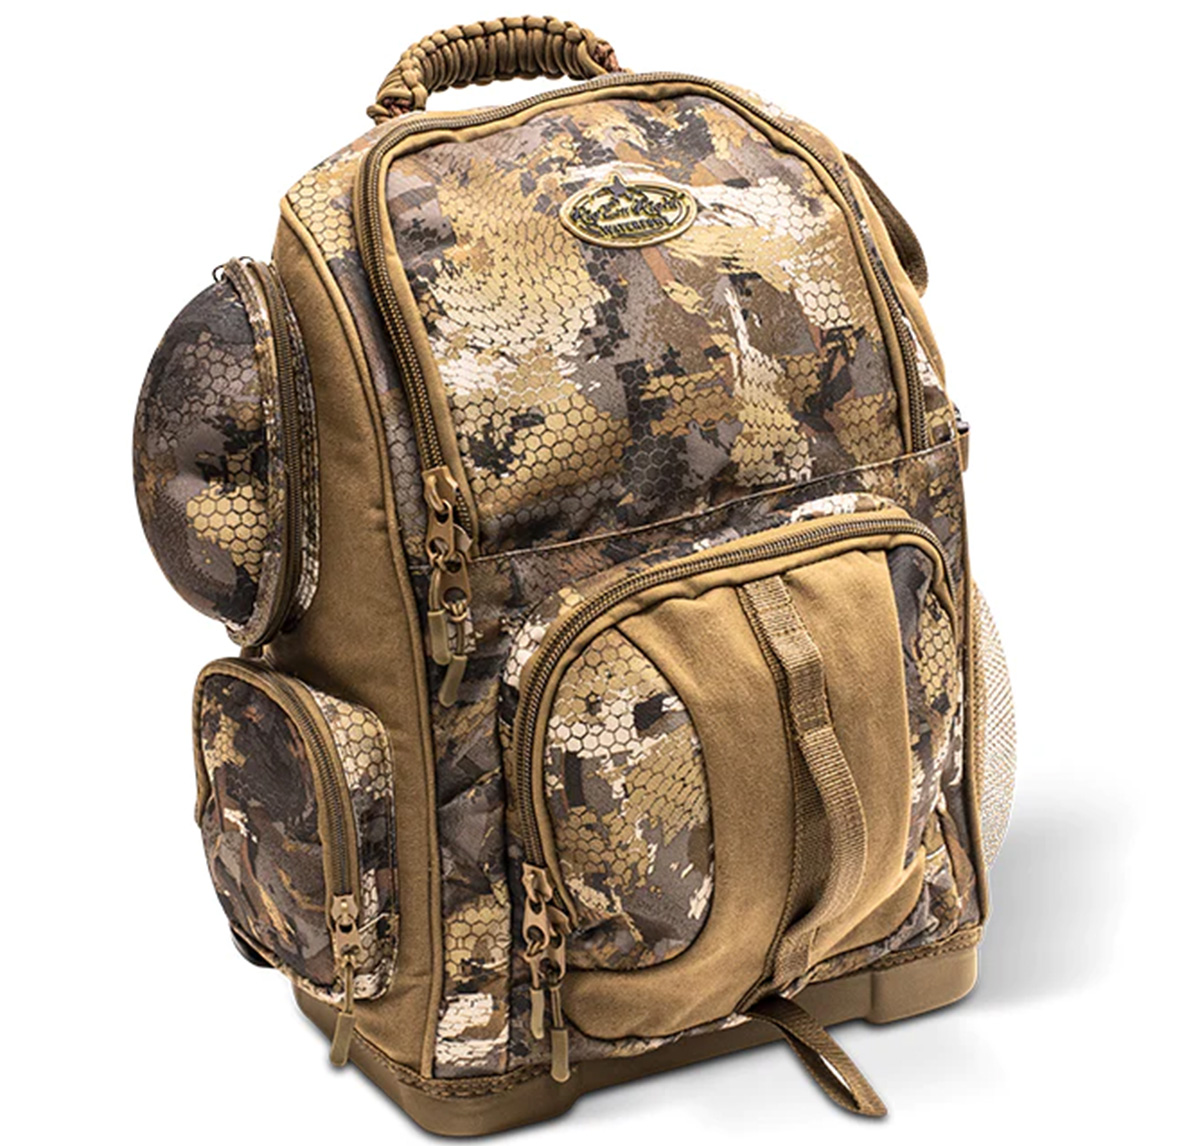 This pack fits everything you need and has features just for duck hunters.